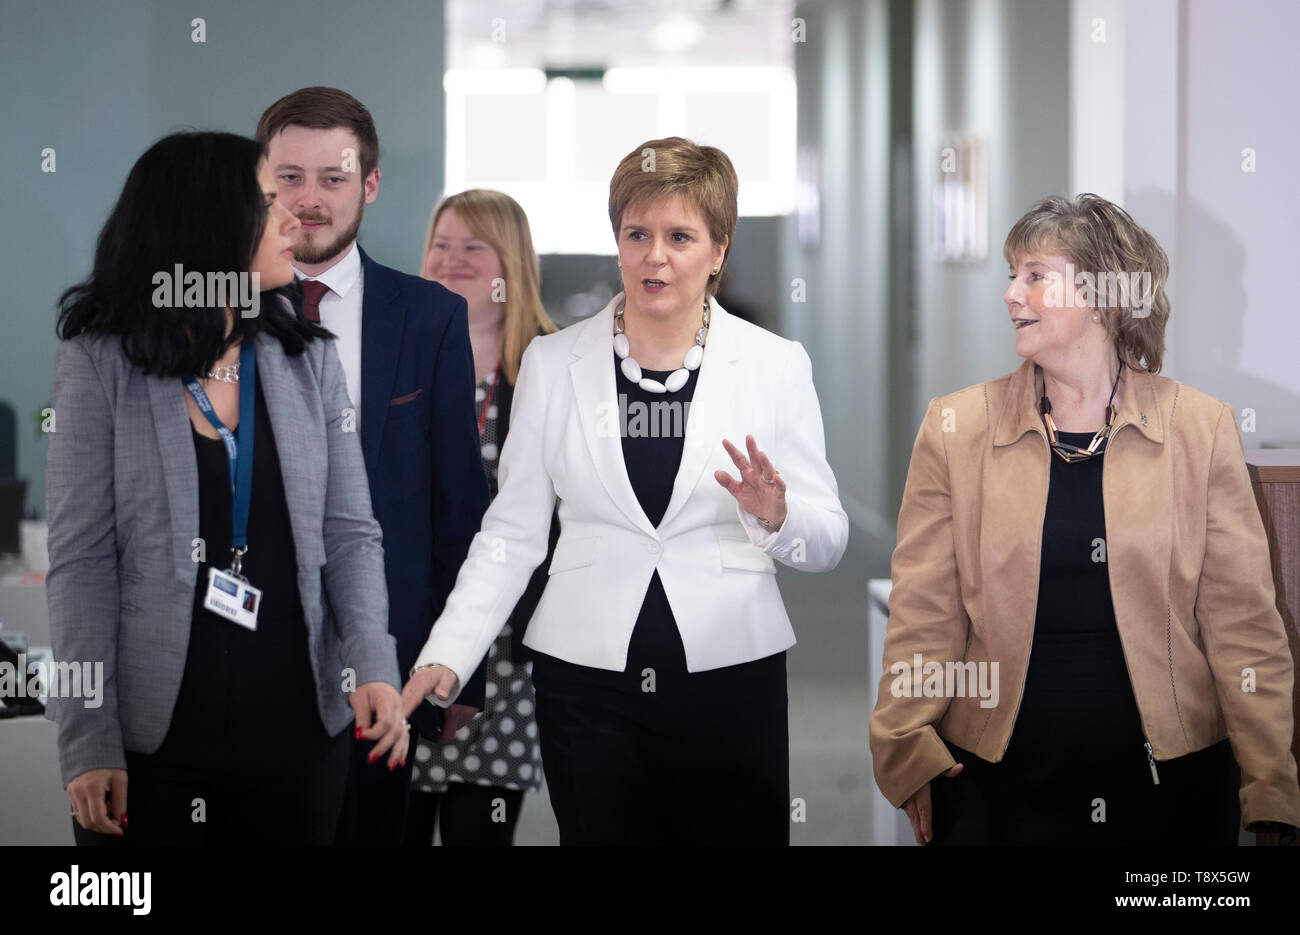 First Minister Nicola Sturgeon (centre) during a visit to Tay House, Glasgow, where she met with EU nationals working at the University of Glasgow ahead of next week's European election. Stock Photo